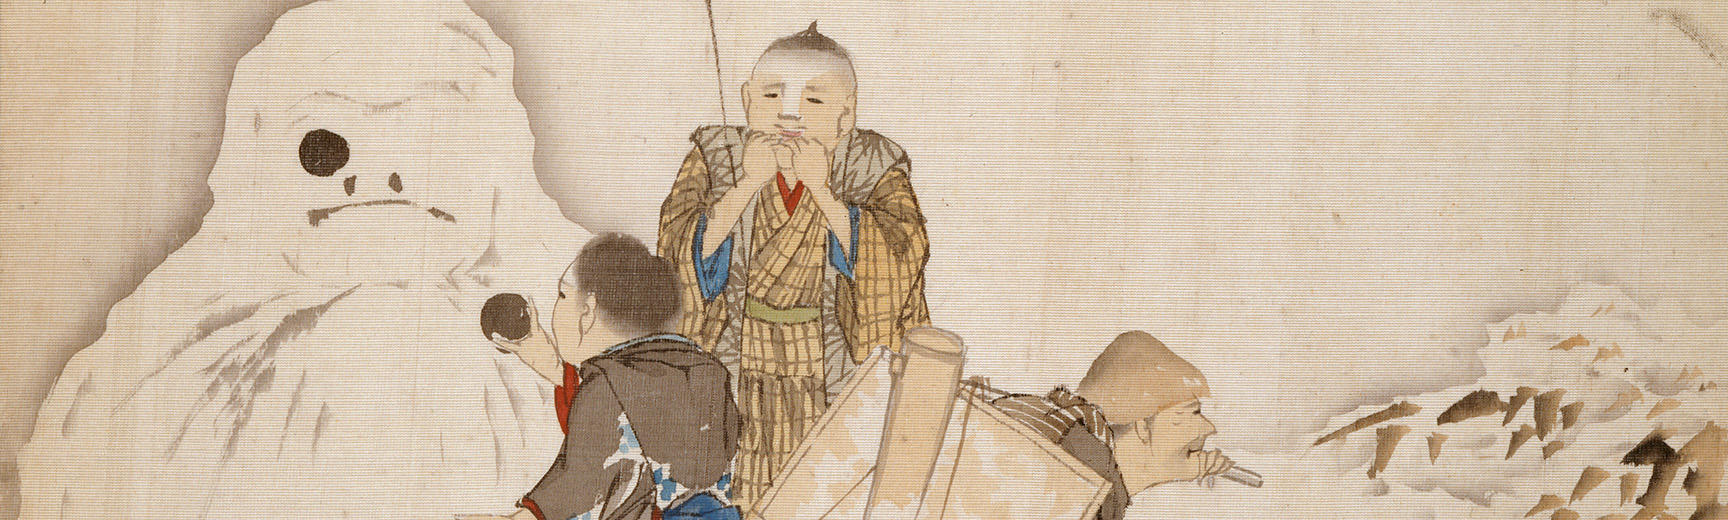 A Japanese painting of a small boy building a snowman